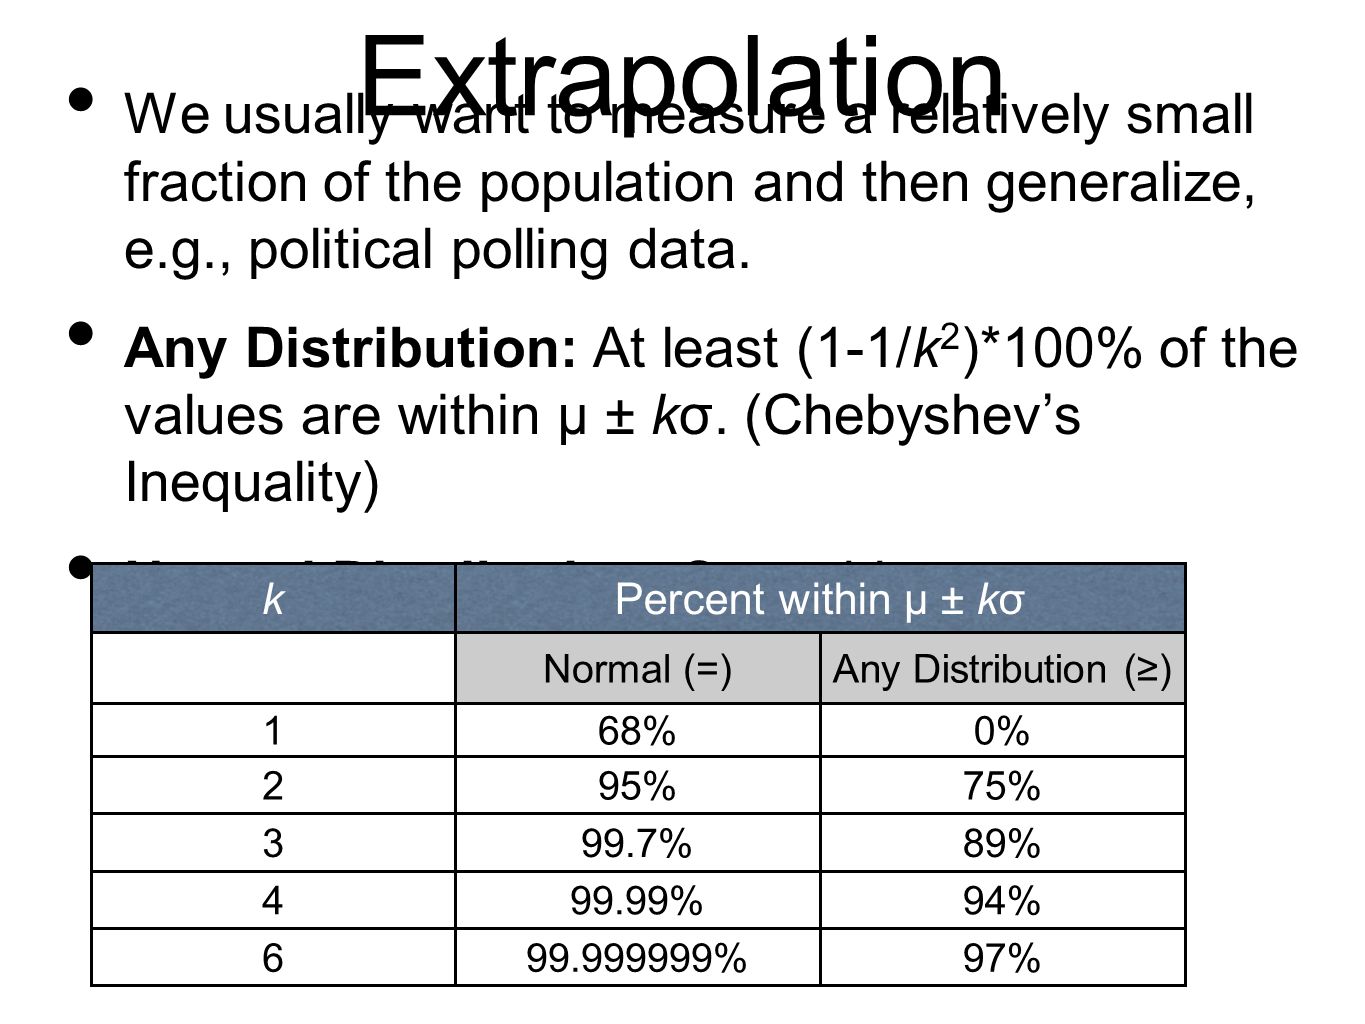 Extrapolation We usually want to measure a relatively small fraction of the population and then generalize, e.g., political polling data.